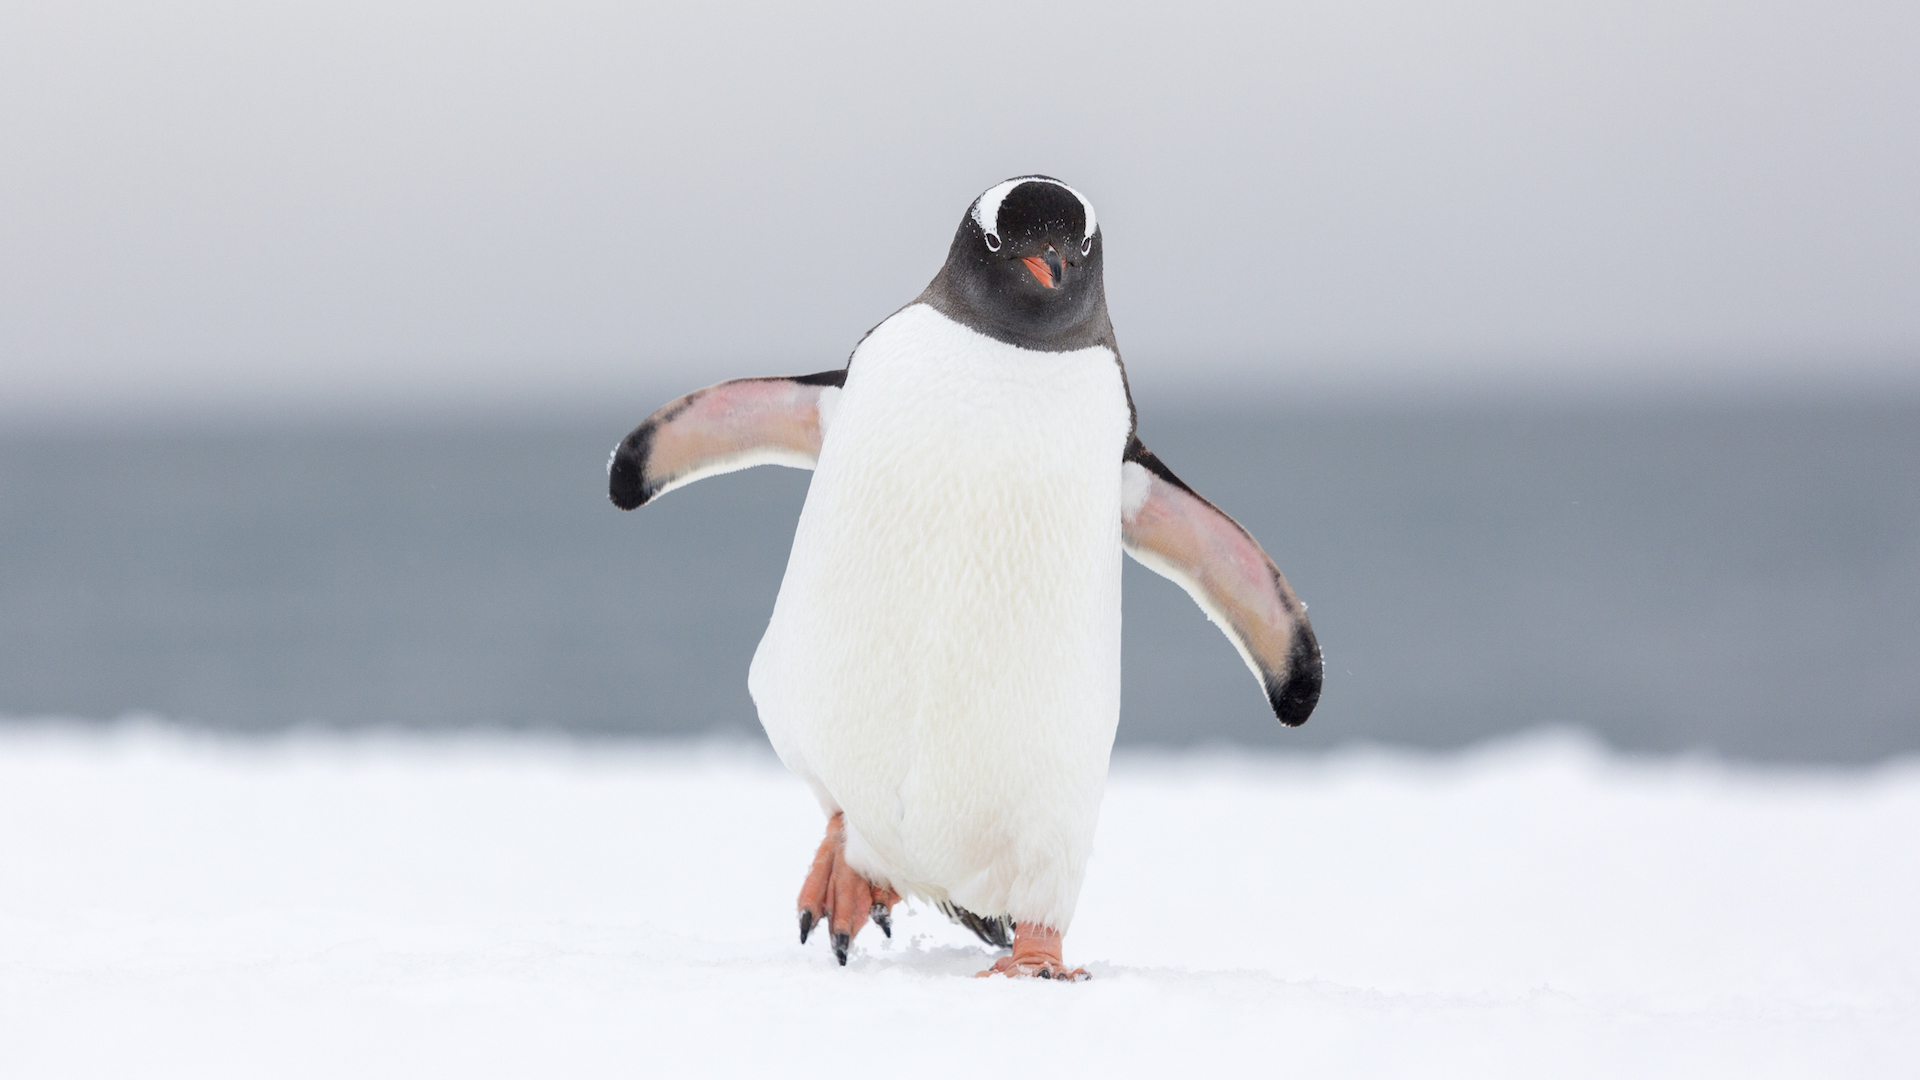 A photograph of a waddling Gentoo penguin on the ice